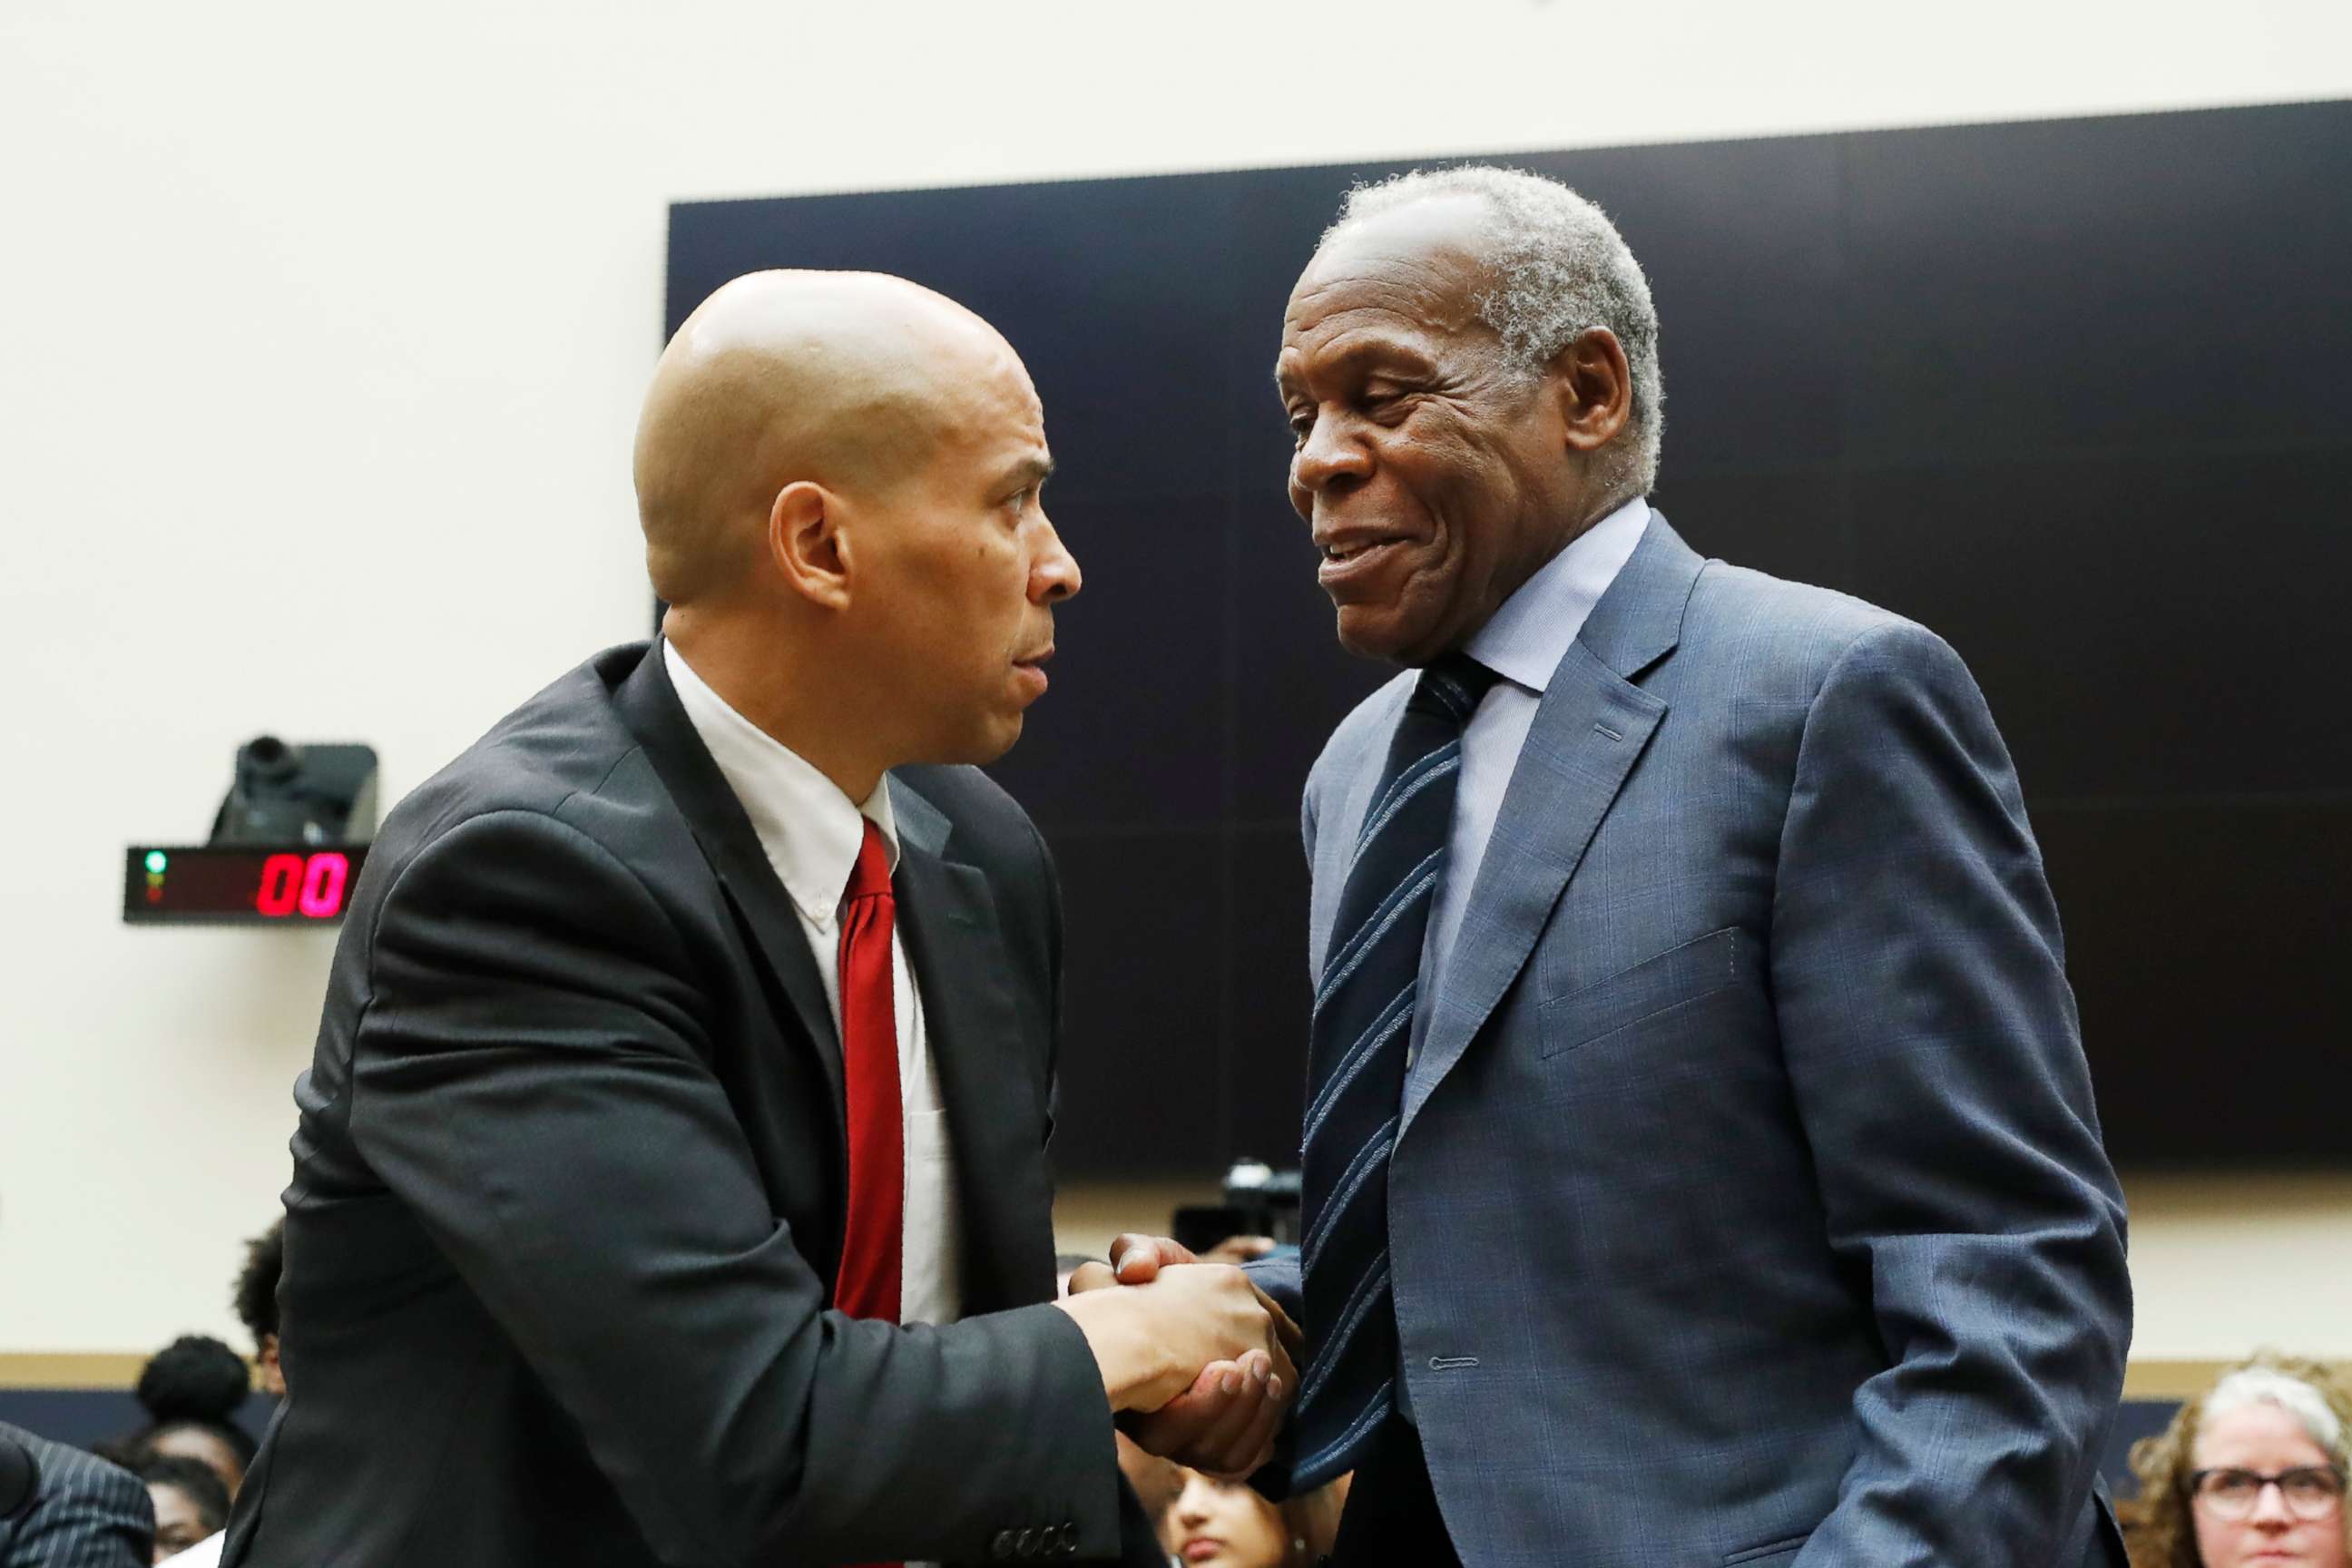 PHOTO: Sen. Cory Booker, left, greets Danny Glover, before they testify about reparations for the descendants of slaves, during a hearing before the House Judiciary Subcommittee in Washington, June 19, 2019.